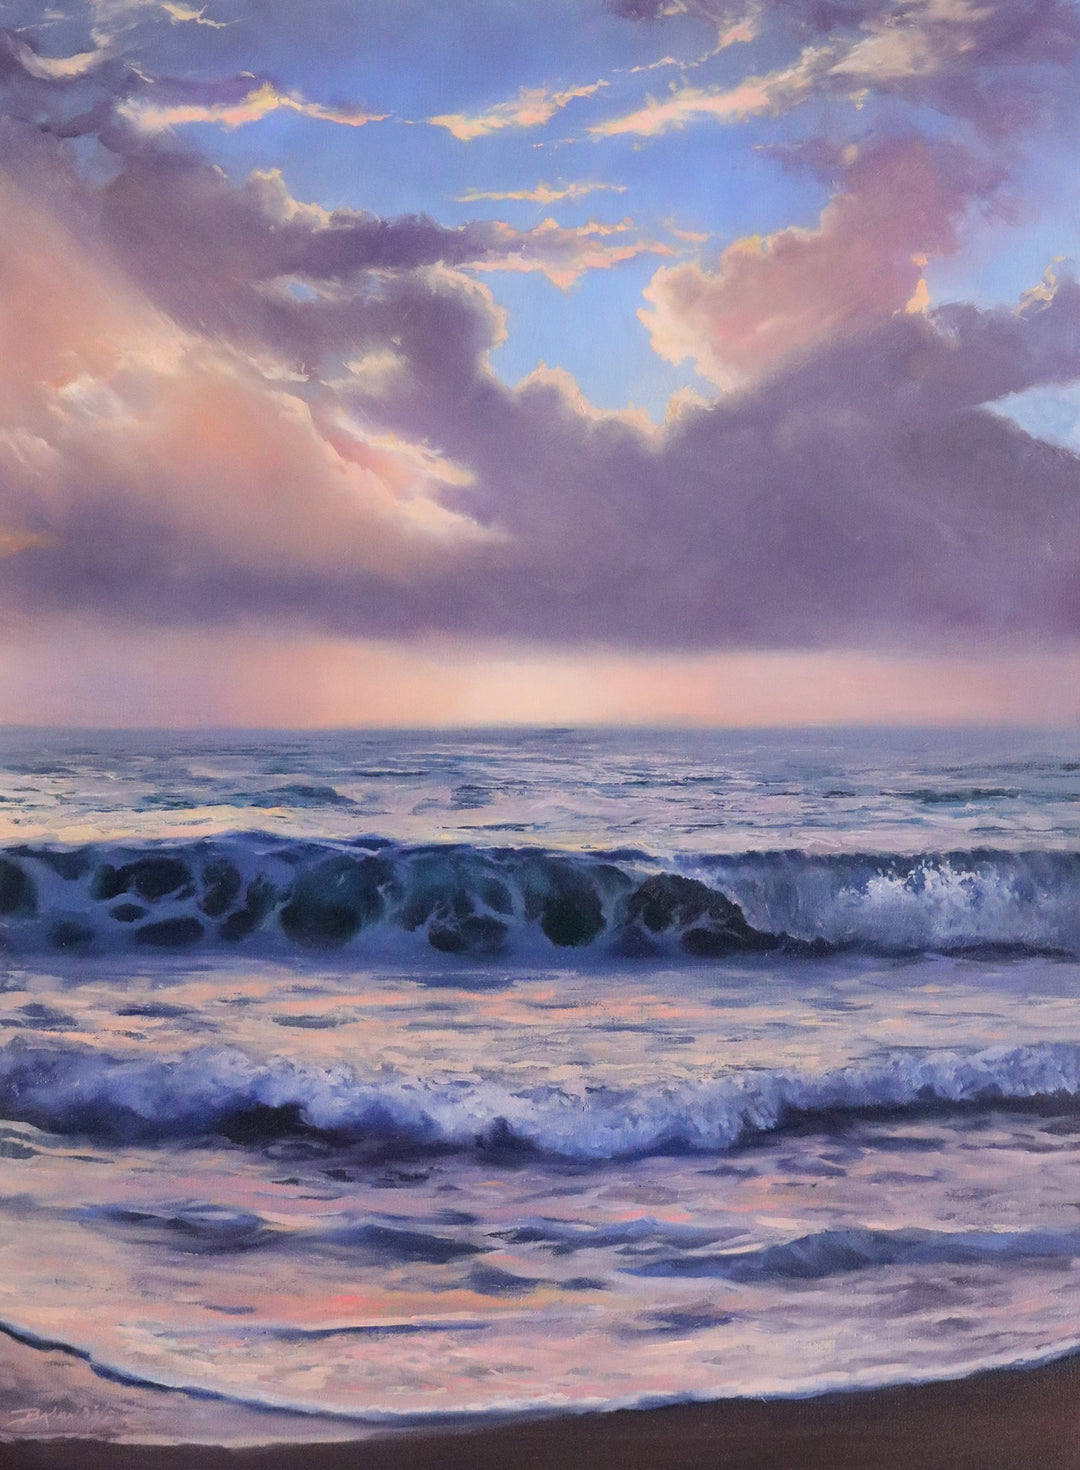 An artist's representation of a beach with waves and clouds, painted in oil on canvas, Brian O'Neill - "Awaken".